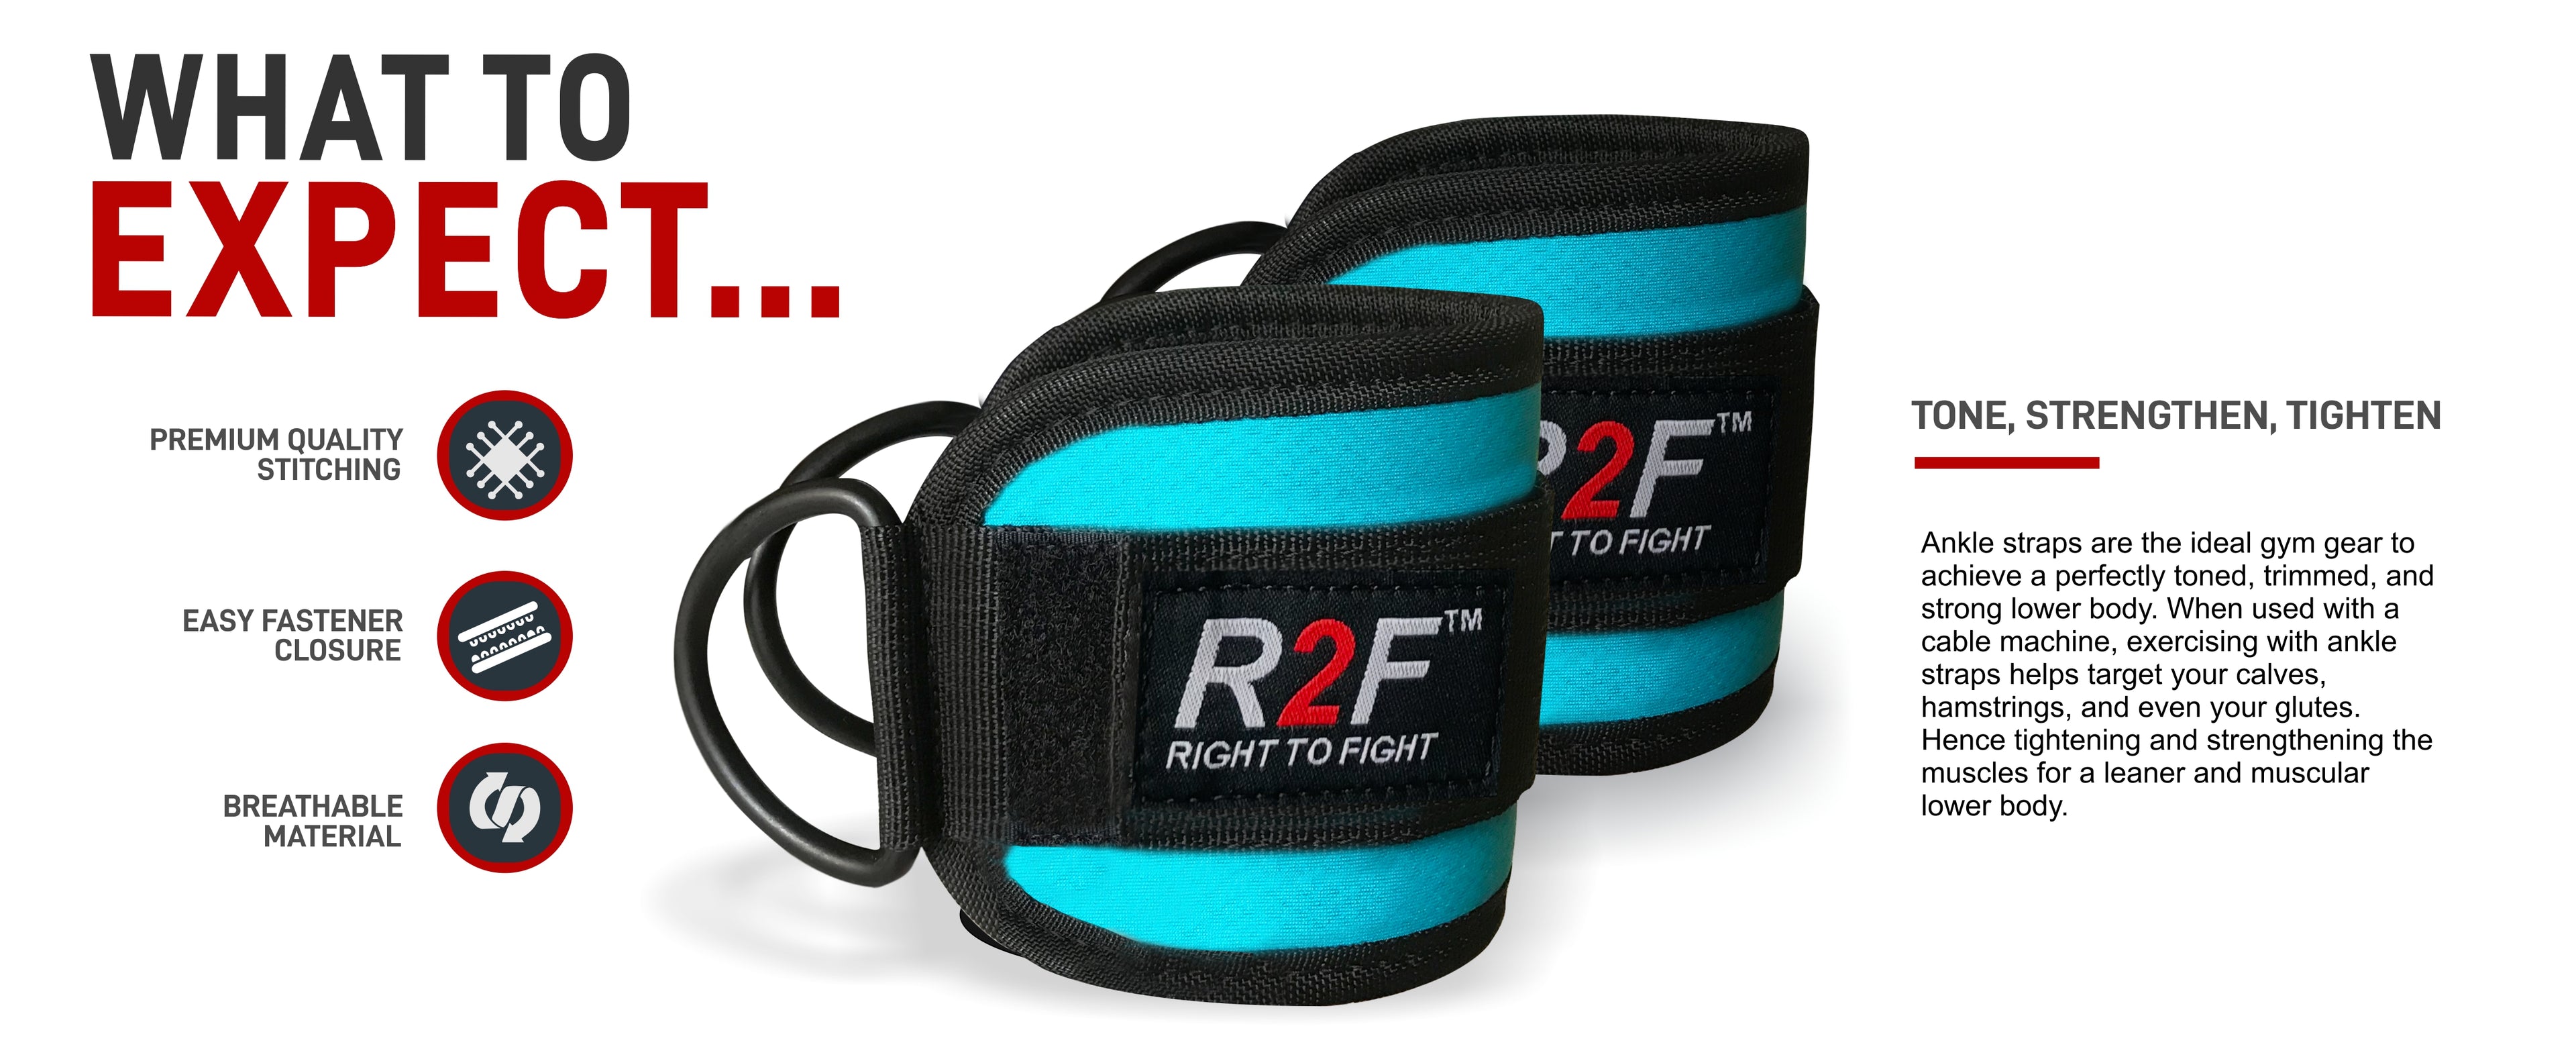 R2F Ankle Straps for Cable Machine Attachments - Pack of 2 Fitness Straps Gym Exercise for Men and Women